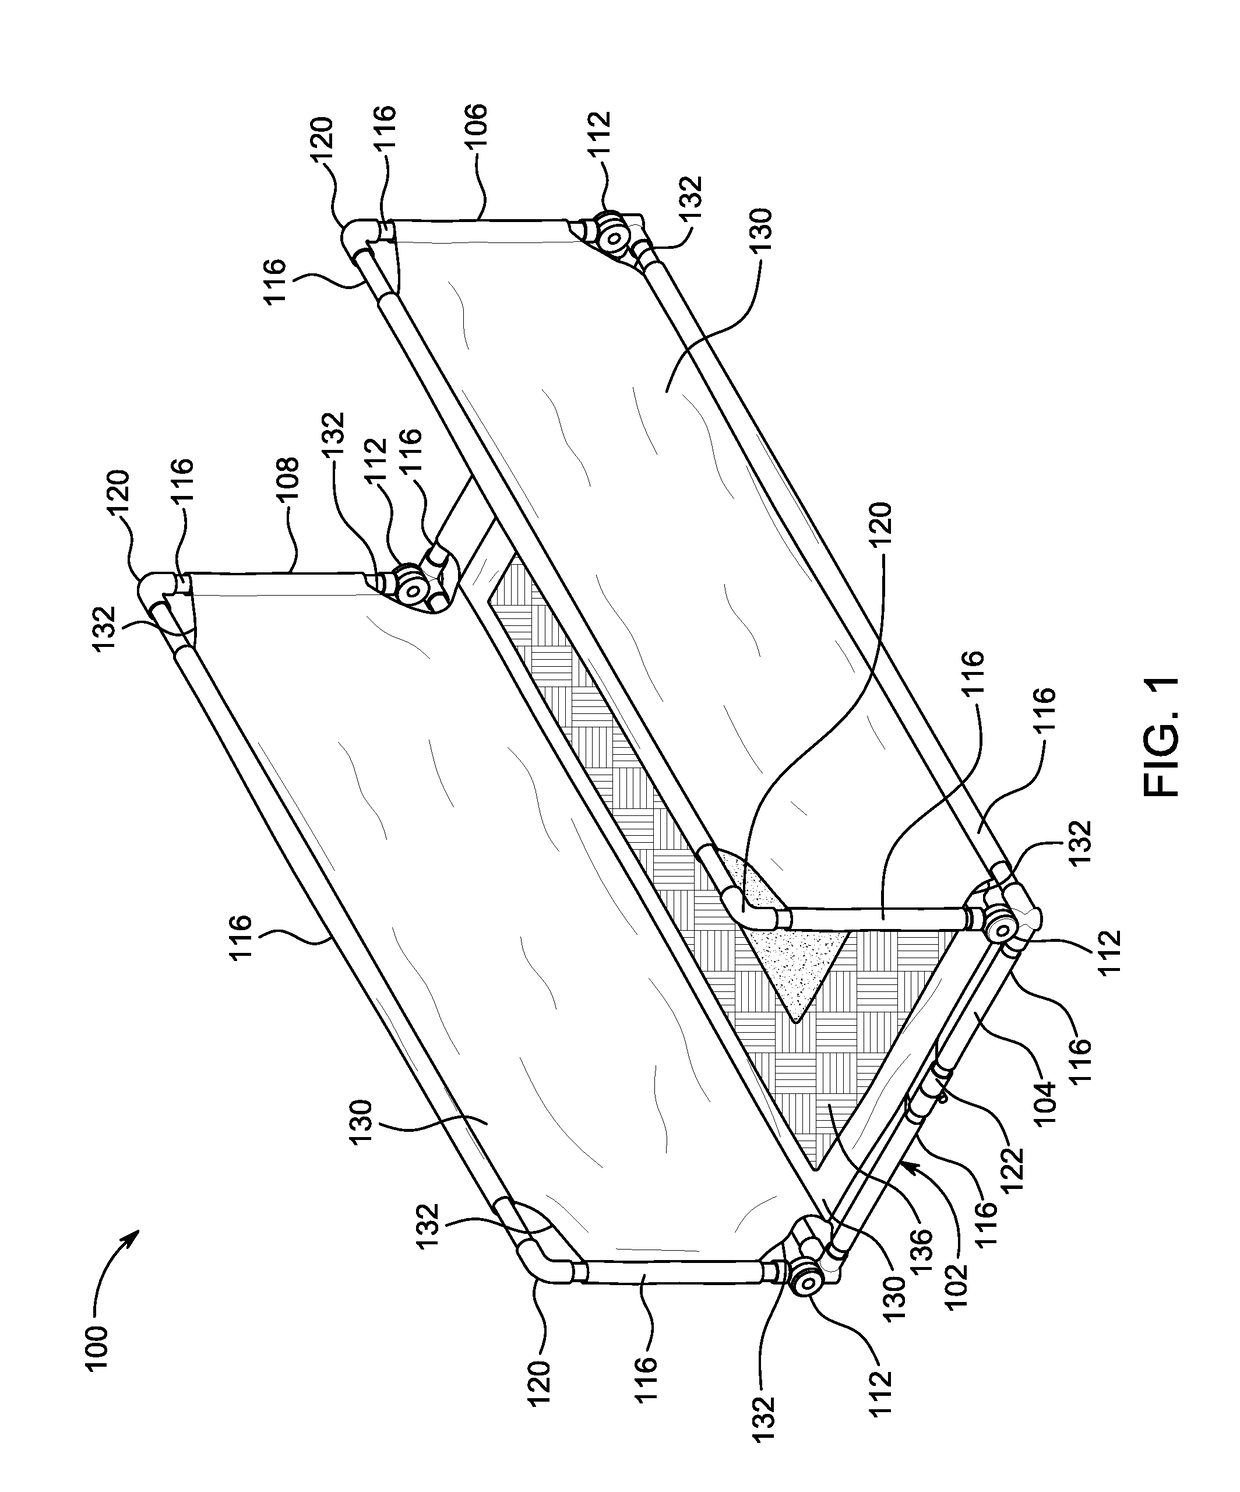 Joint with automatic locking joint for reconfigurable device and method of manufacture